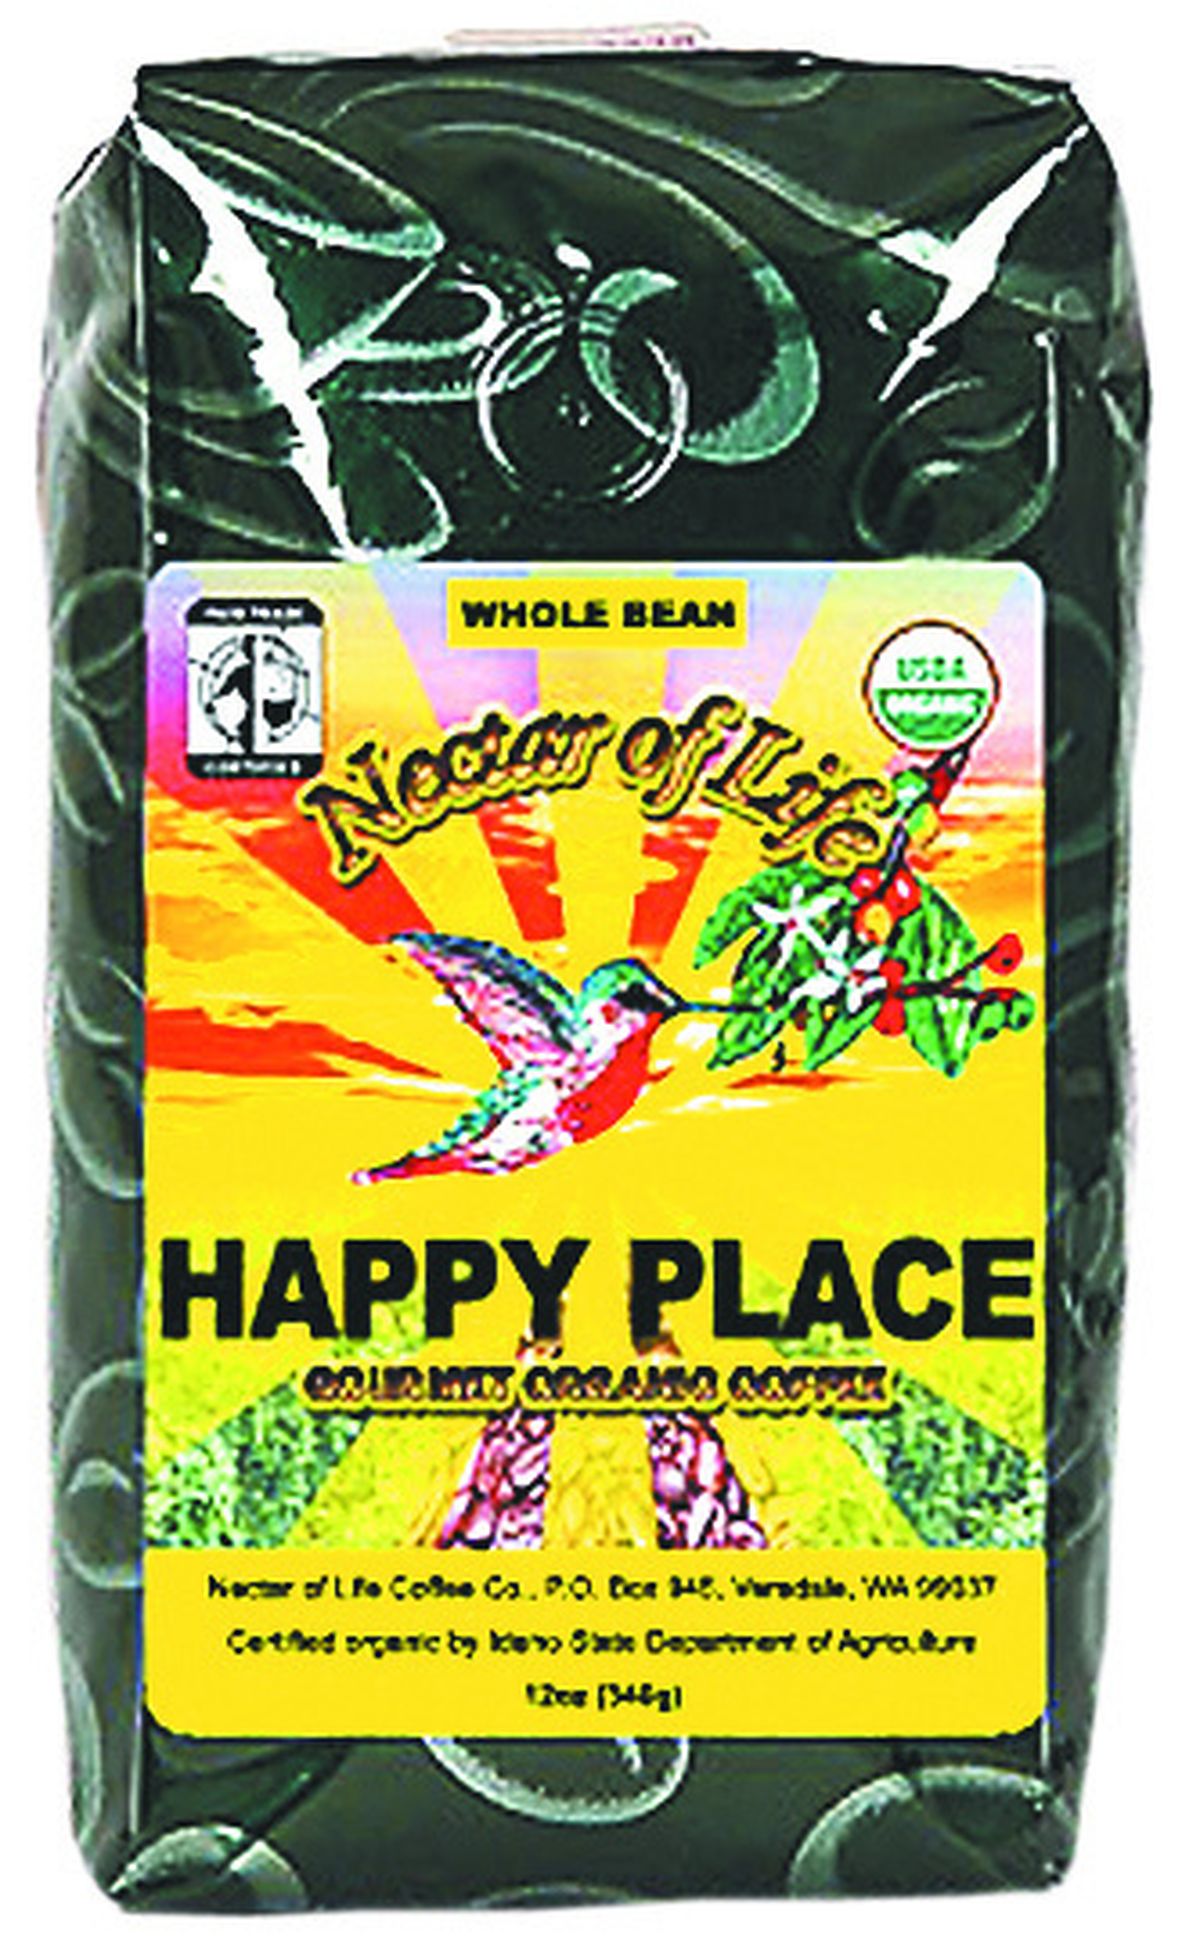 Nectar of Life’s Happy Place coffee.